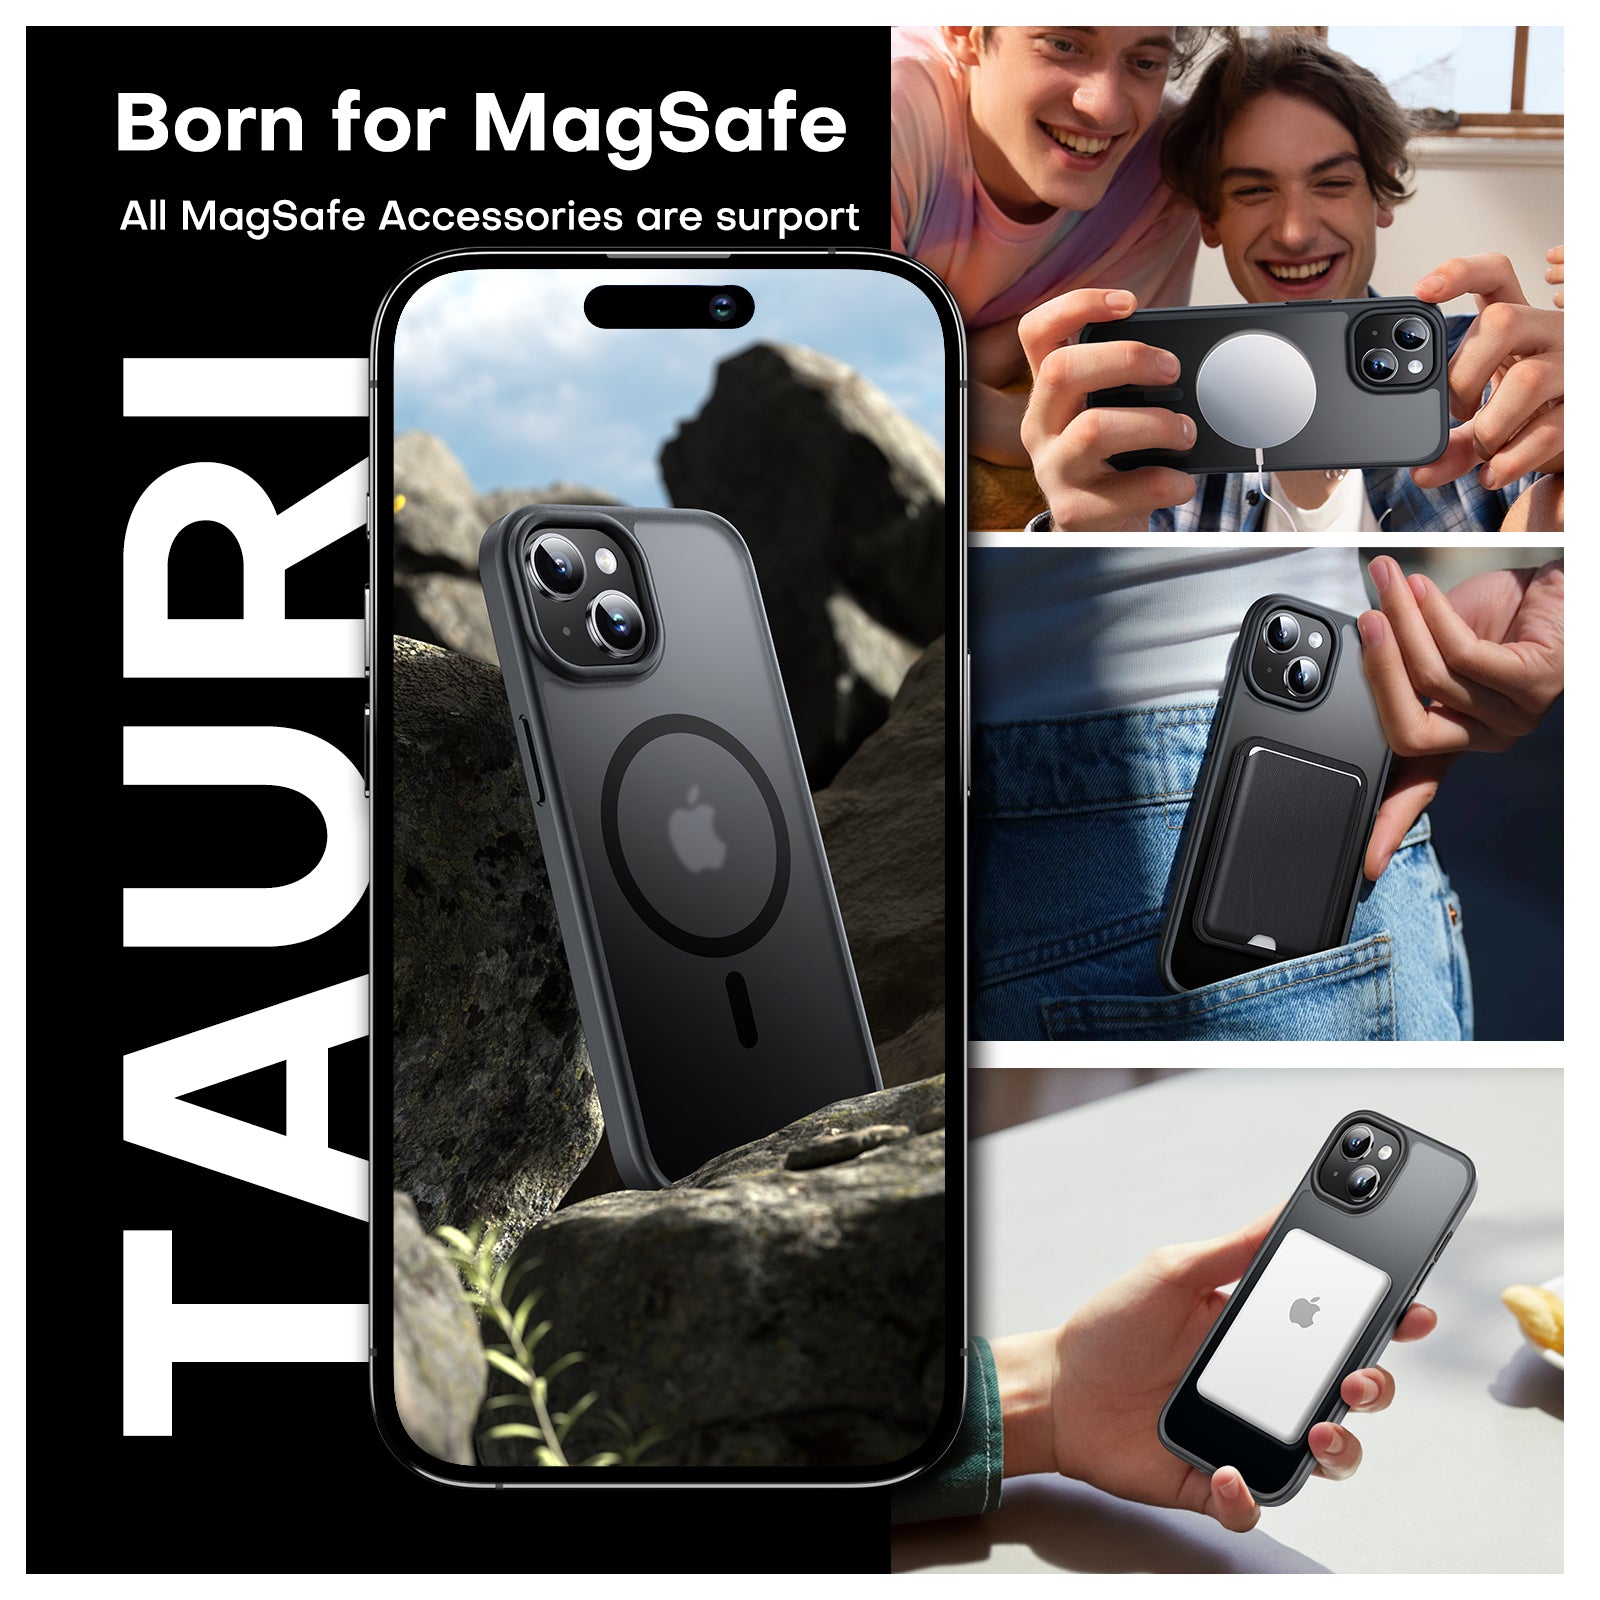 TAURI 5 in 1 Magnetic Case for iPhone 15 Plus [Mil-Grade Drop Protection] with 2X Tempered Screen Protector +2X Camera Lens Protector, Translucent Matte Slim Mag-Safe Case 6.7" - Black